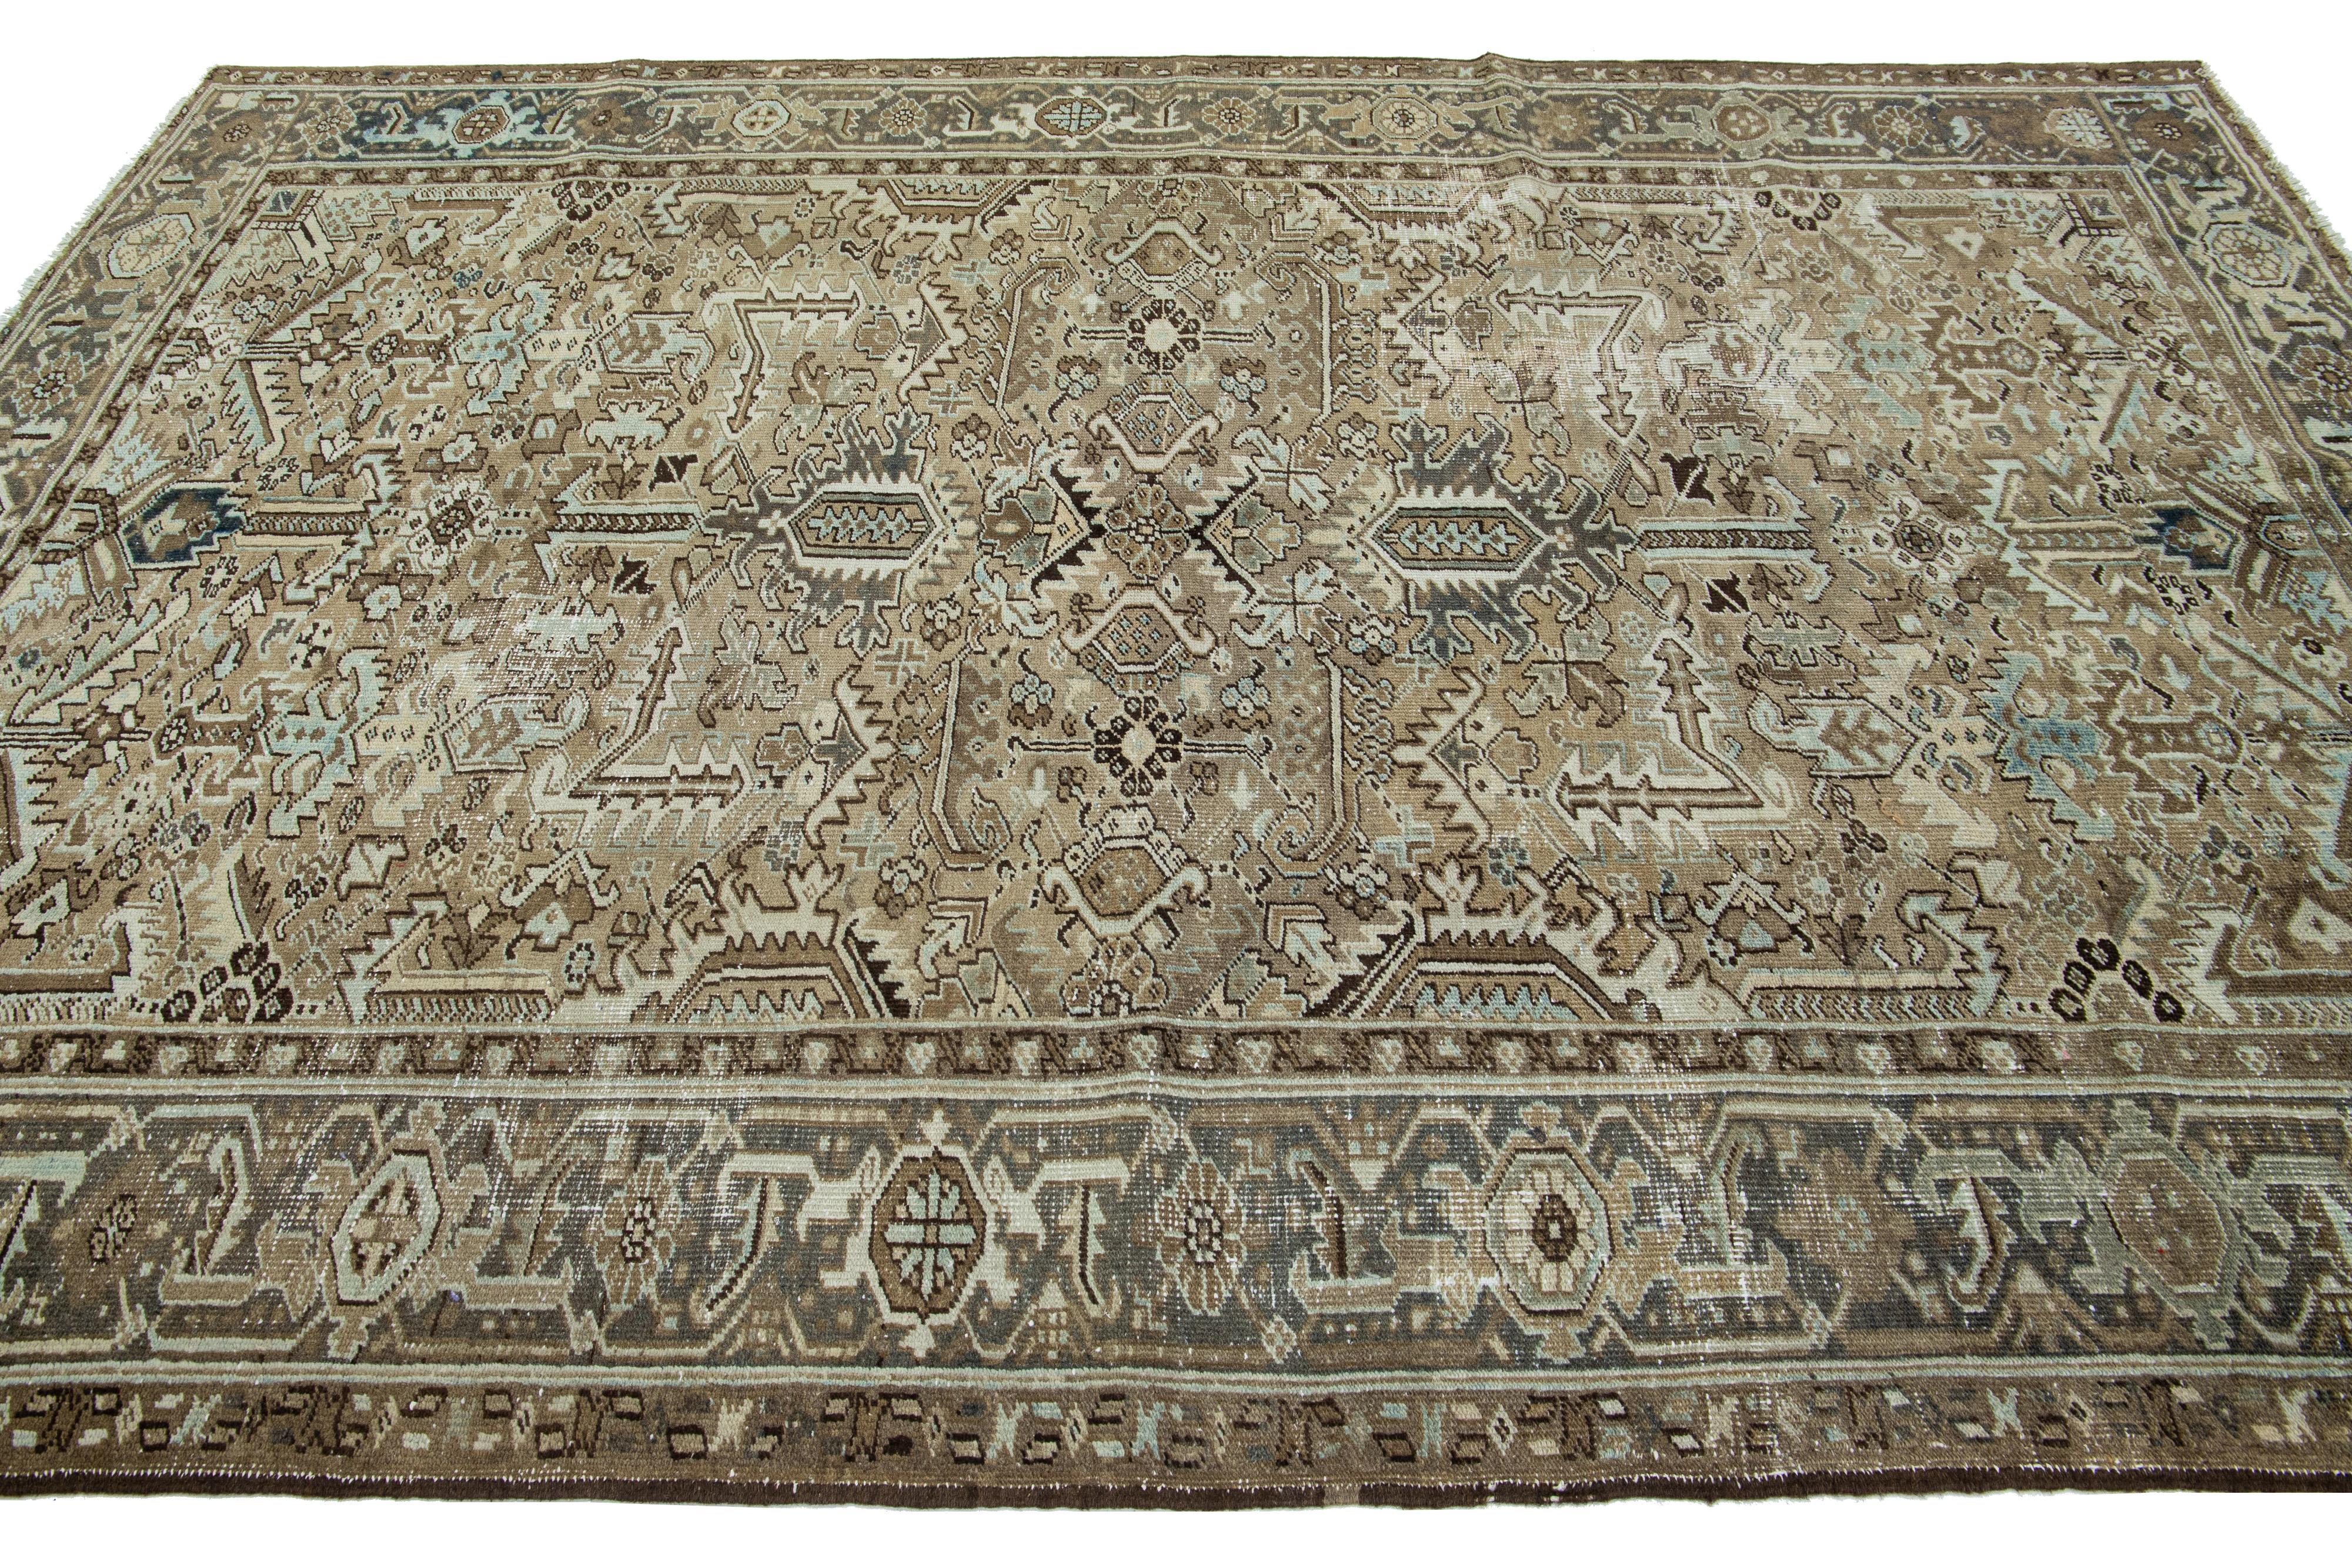 Hand-Knotted Allover Antique Wool Rug Persian Heriz In Brown Color From The 1920s For Sale